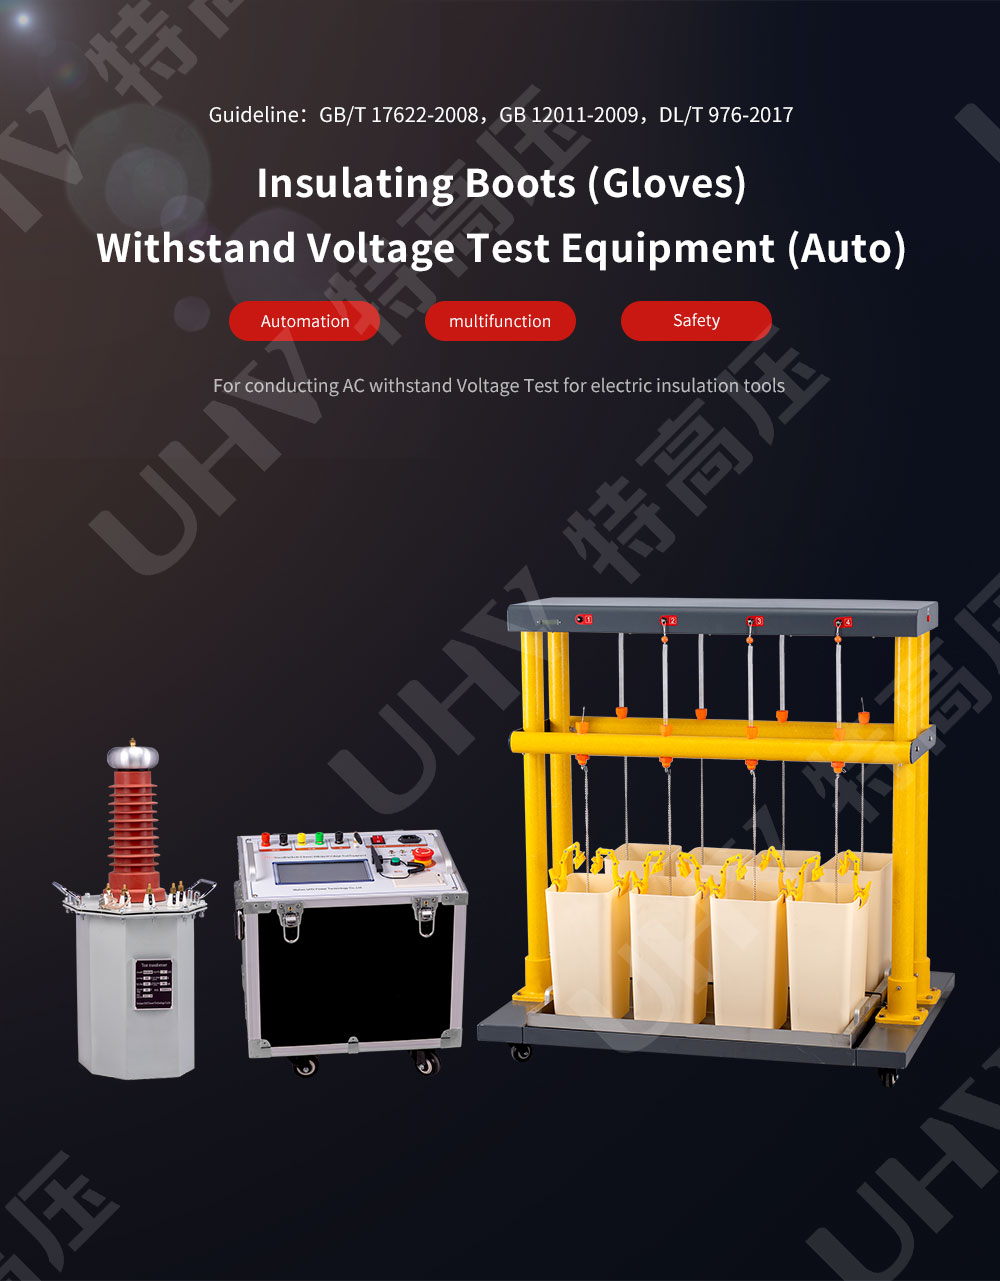 Insulation boot (glove) withstand voltage